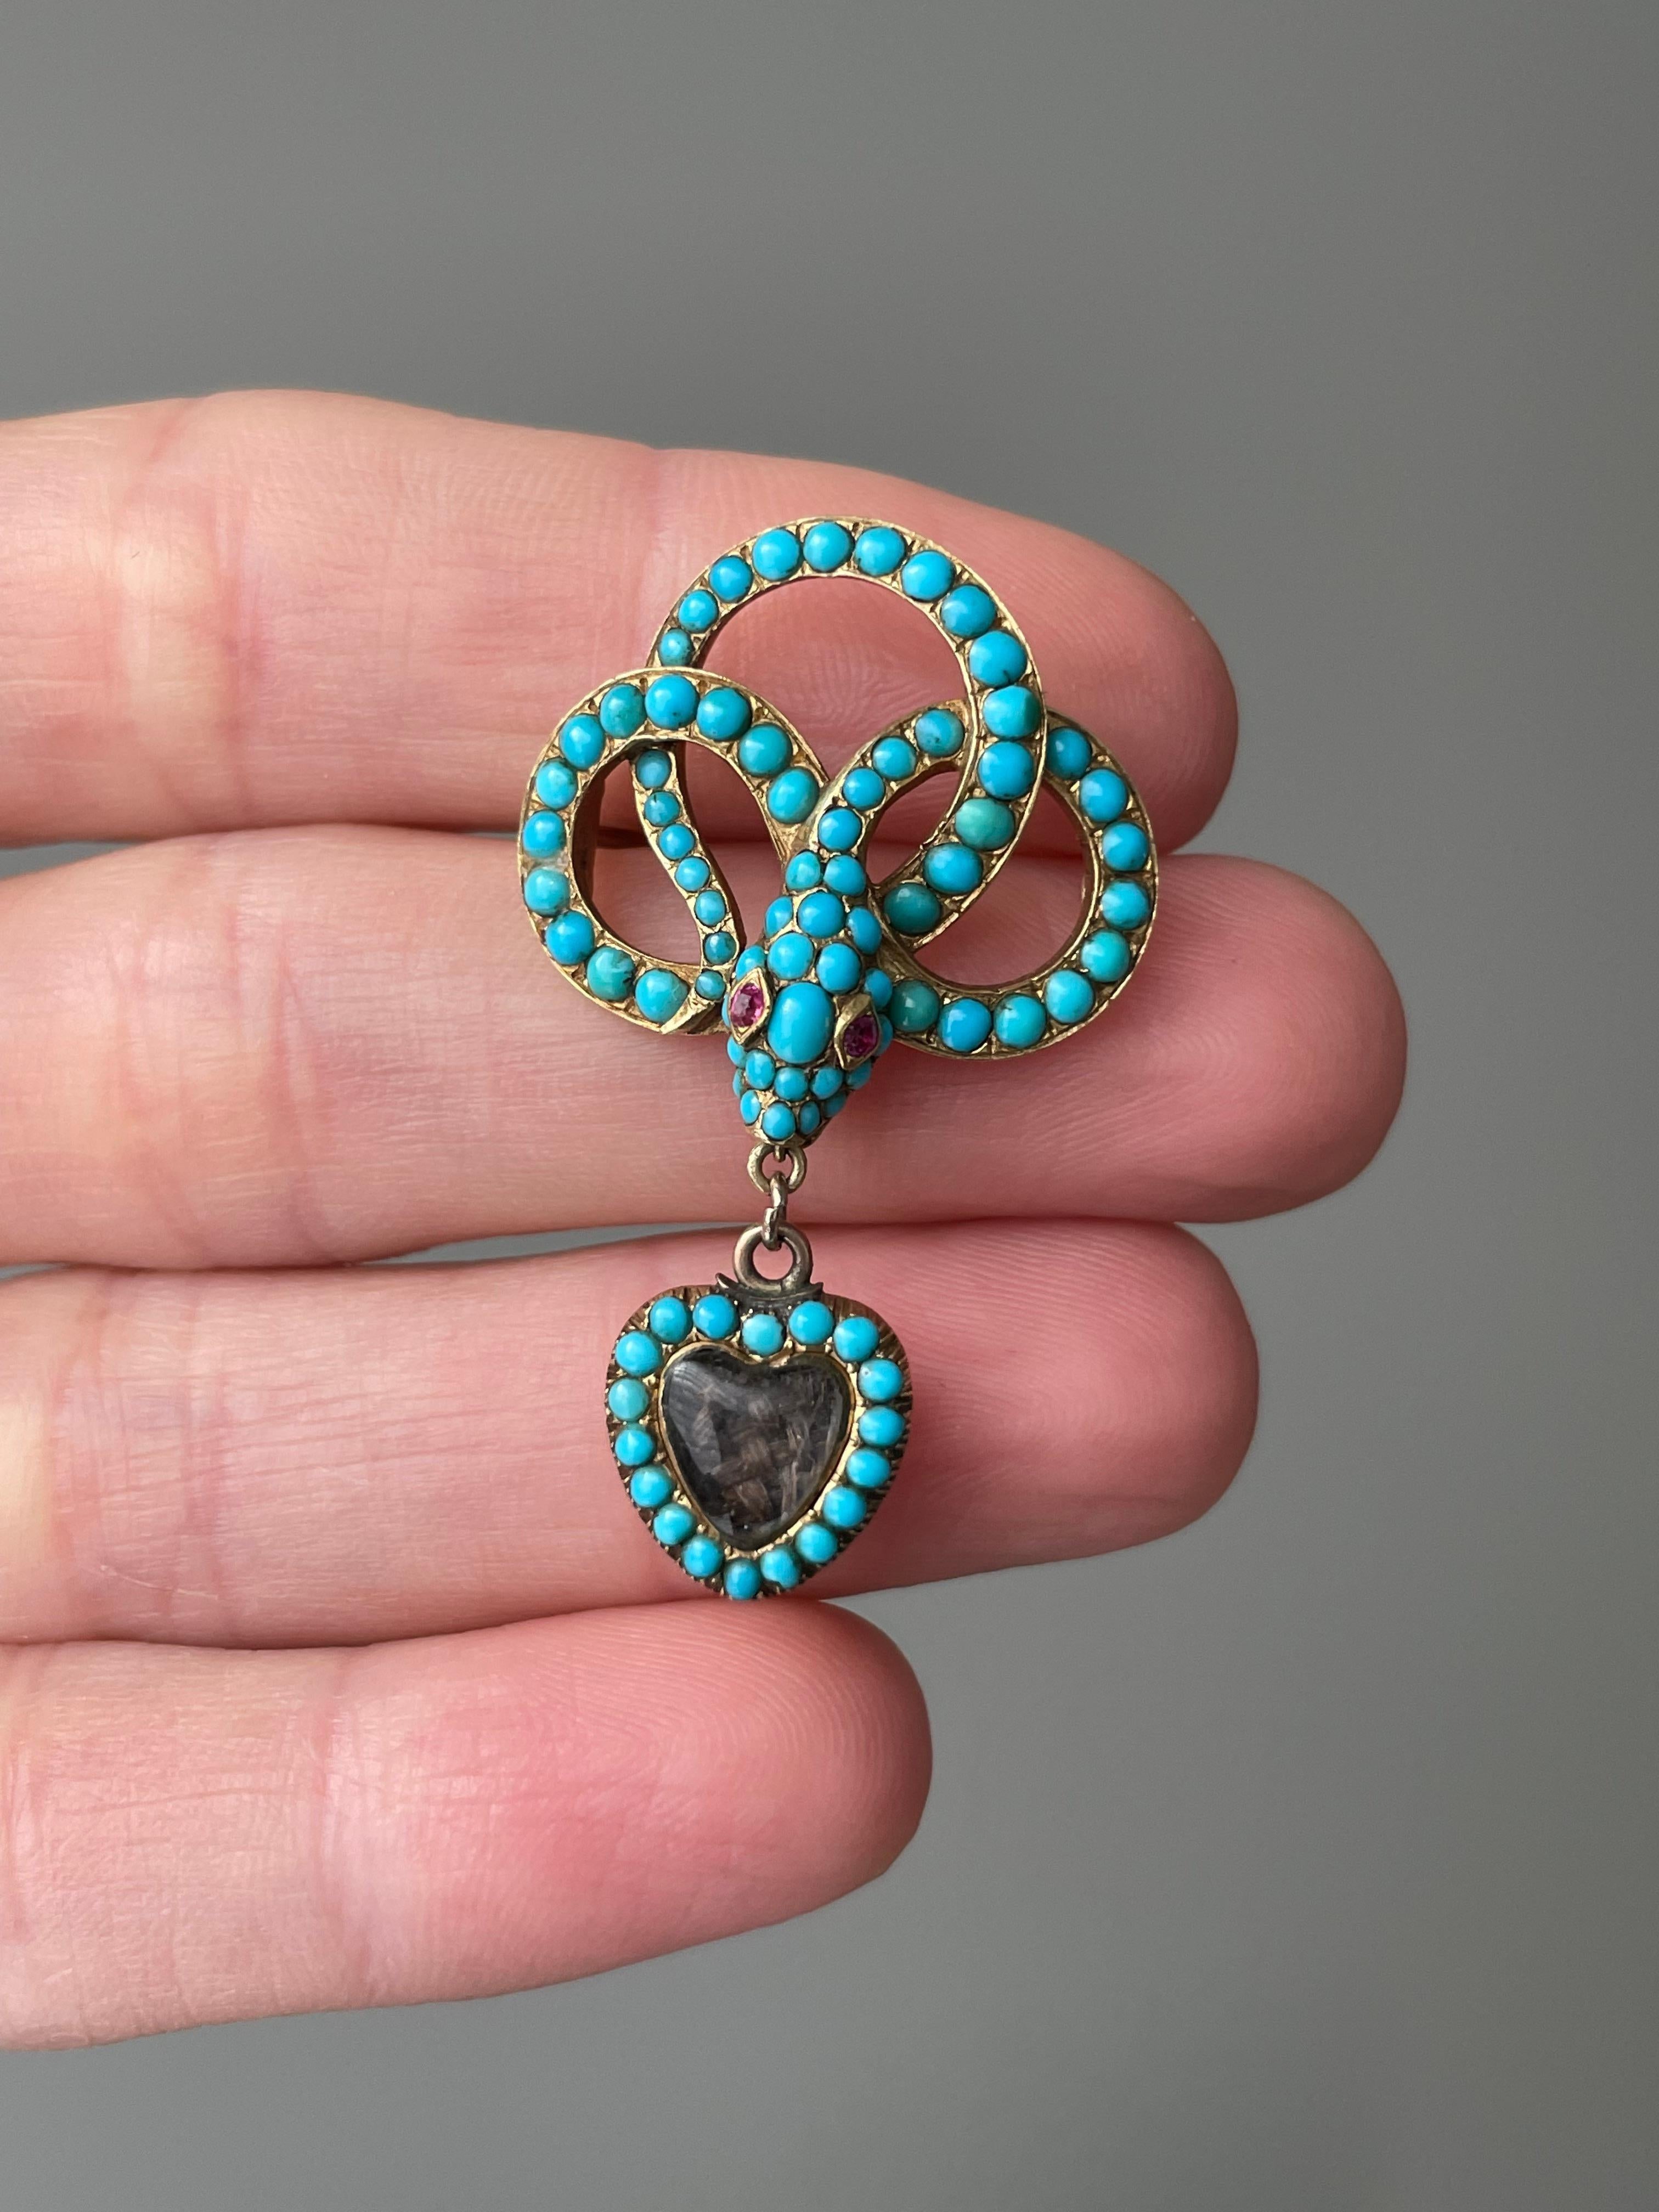 Cabochon Victorian Pave Turquoise Snake Brooch For Sale